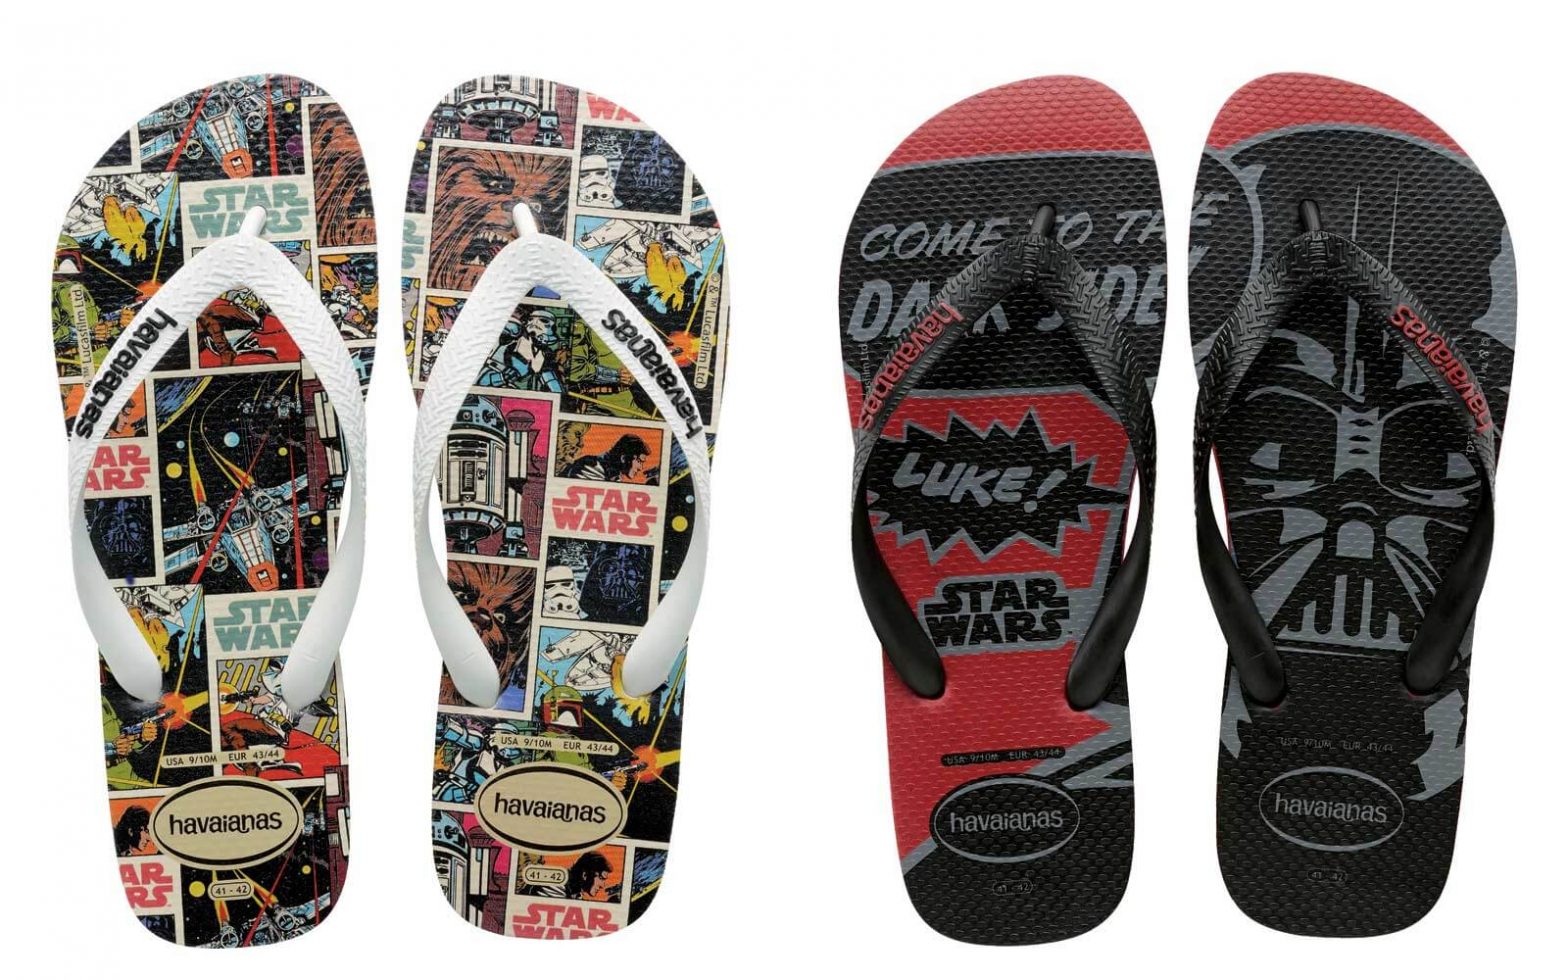 Havaianas channels the force with Star Wars-inspired footwear line